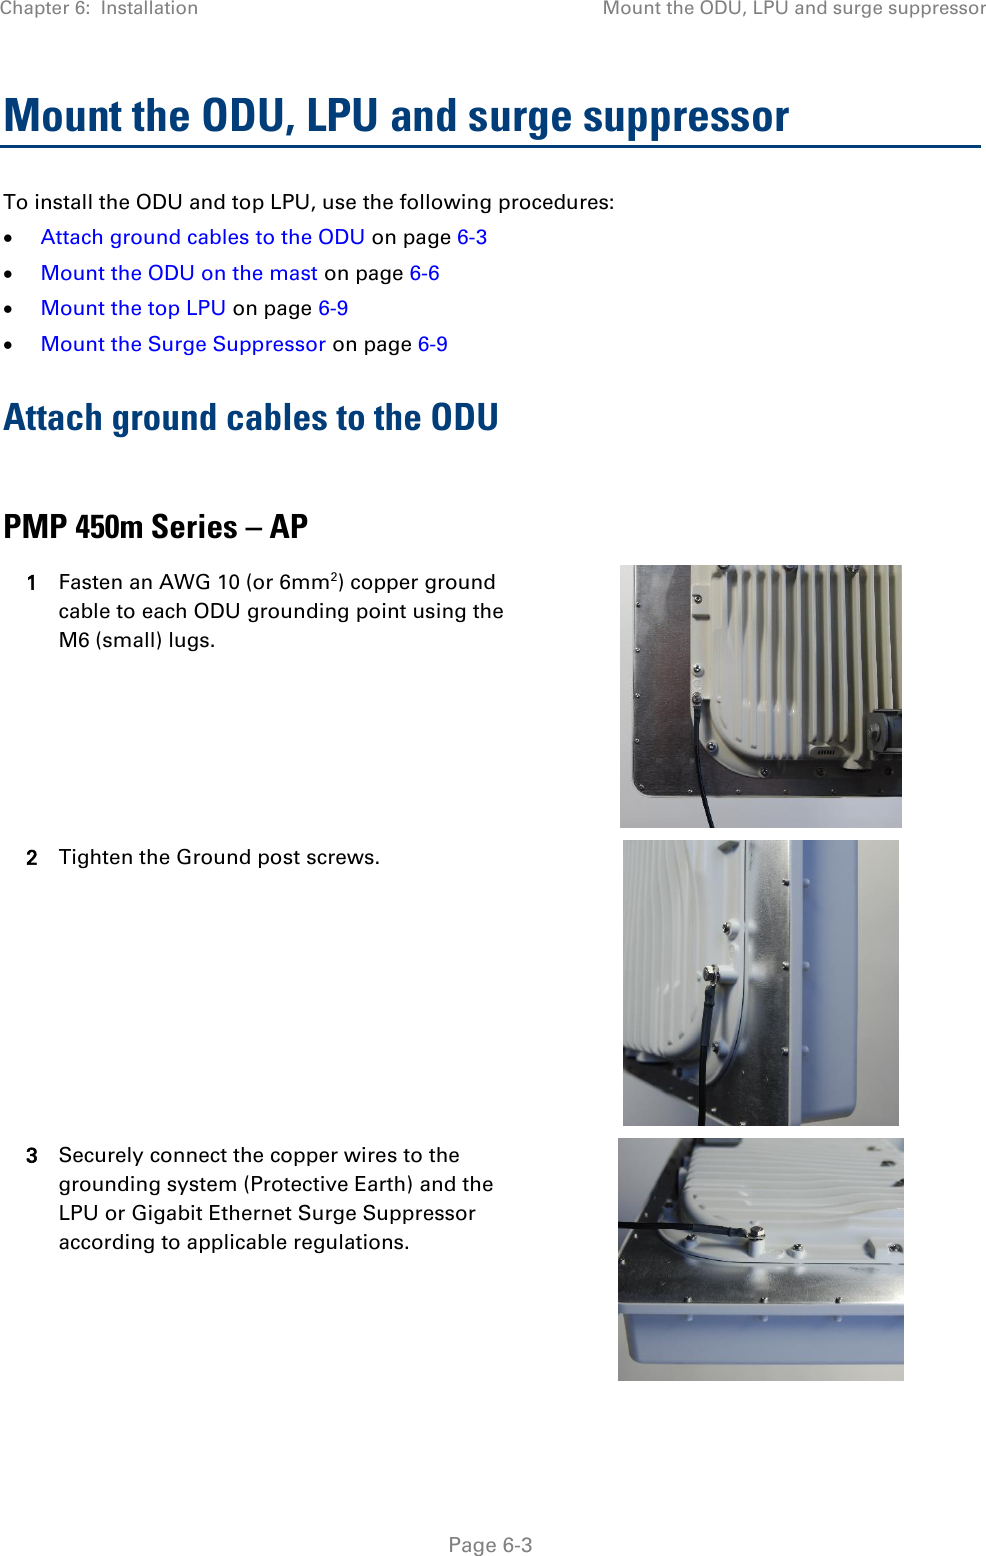 Chapter 6:  Installation Mount the ODU, LPU and surge suppressor   Page 6-3 Mount the ODU, LPU and surge suppressor To install the ODU and top LPU, use the following procedures:  Attach ground cables to the ODU on page 6-3  Mount the ODU on the mast on page 6-6  Mount the top LPU on page 6-9  Mount the Surge Suppressor on page 6-9 Attach ground cables to the ODU  PMP 450m Series – AP 1 Fasten an AWG 10 (or 6mm2) copper ground cable to each ODU grounding point using the M6 (small) lugs.  2 Tighten the Ground post screws.  3 Securely connect the copper wires to the grounding system (Protective Earth) and the LPU or Gigabit Ethernet Surge Suppressor according to applicable regulations.   